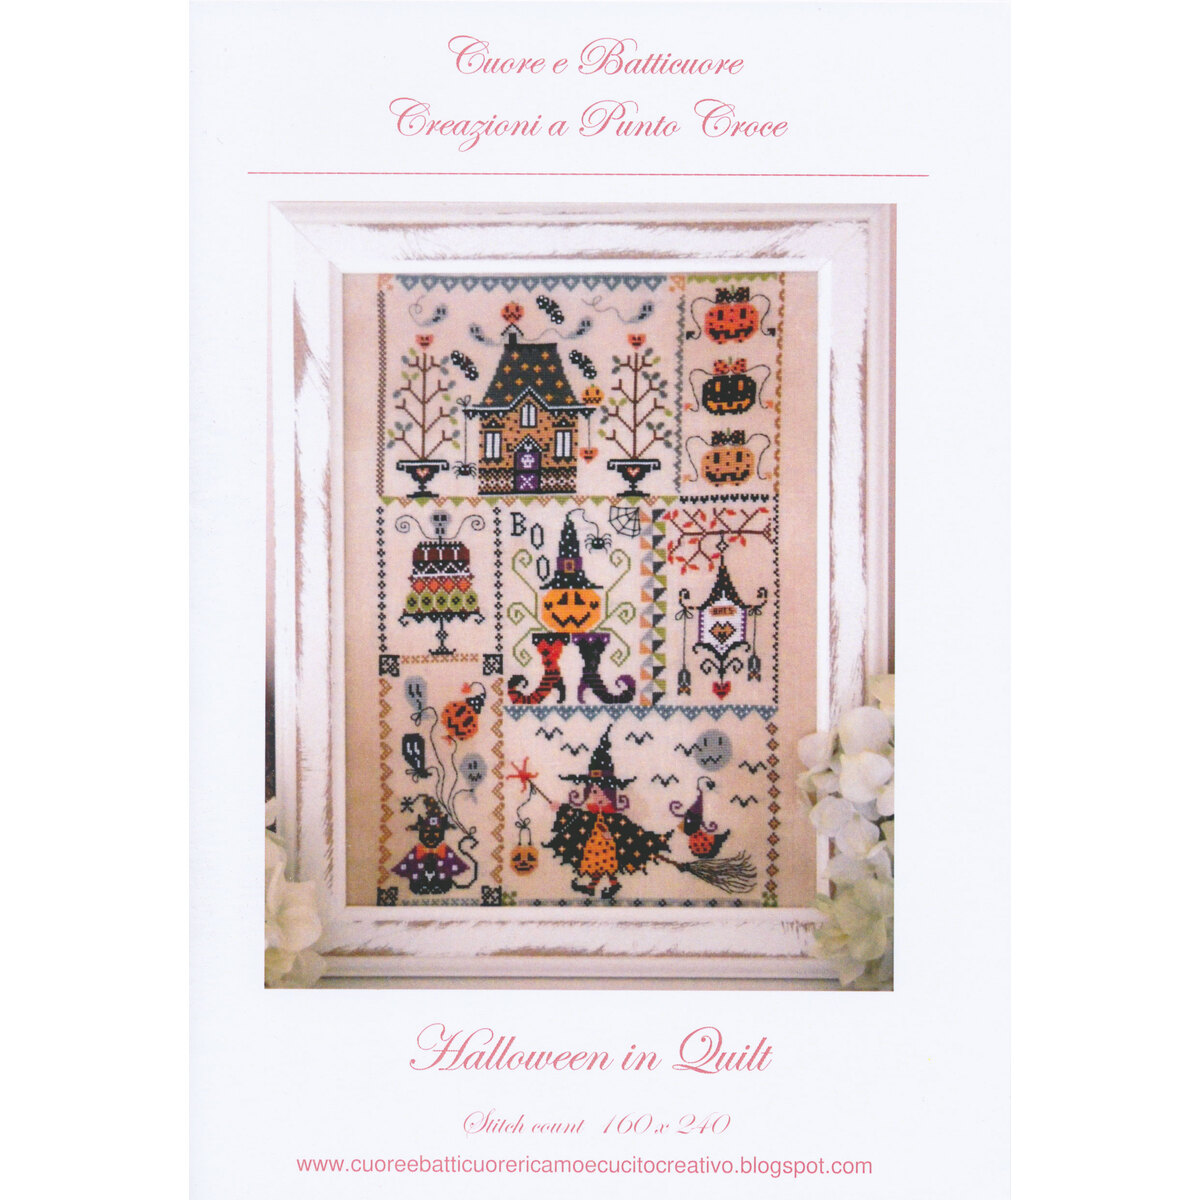 Remnant Stitch Accessories - Counted Cross Stitch Pattern